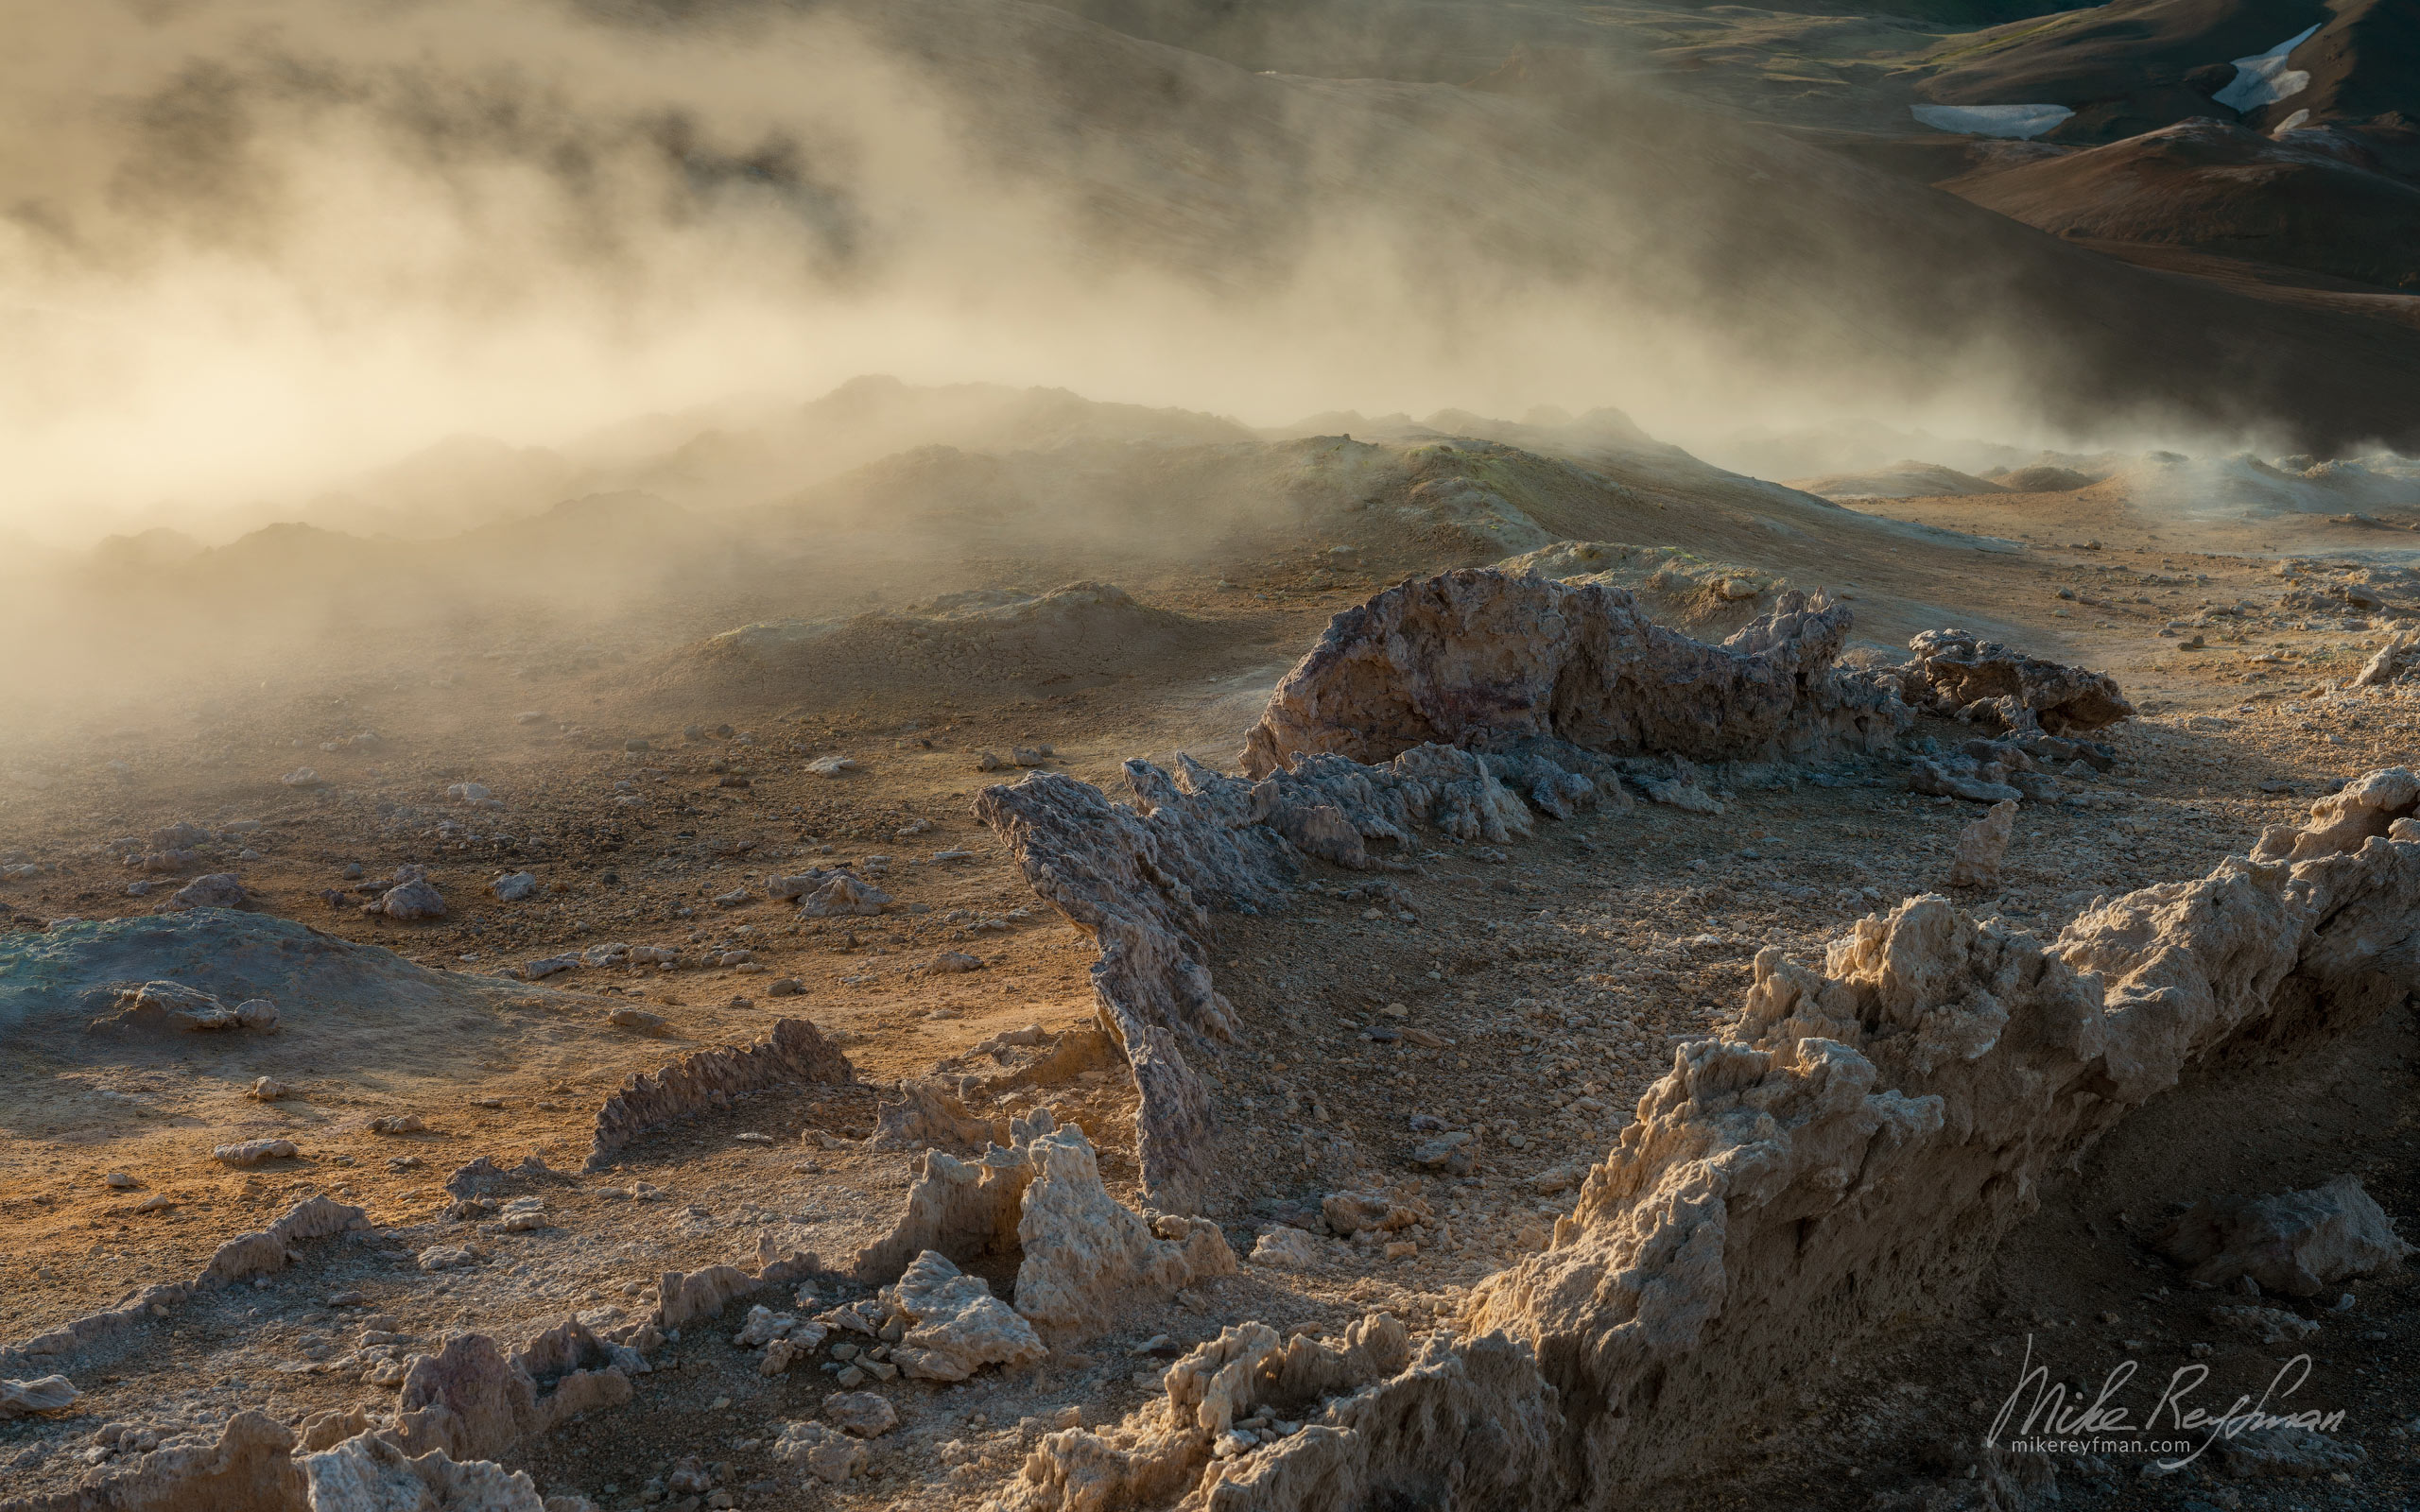 Namafjall - Hverir Geothermal Area. Lake Myvatn region, Iceland 042-IC-GP _D8B1802 - Rhyolite Mountains, Crater Lakes, Geothermal Areas, Lava Fields and Glacial Rivers. Iceland.  - Mike Reyfman Photography